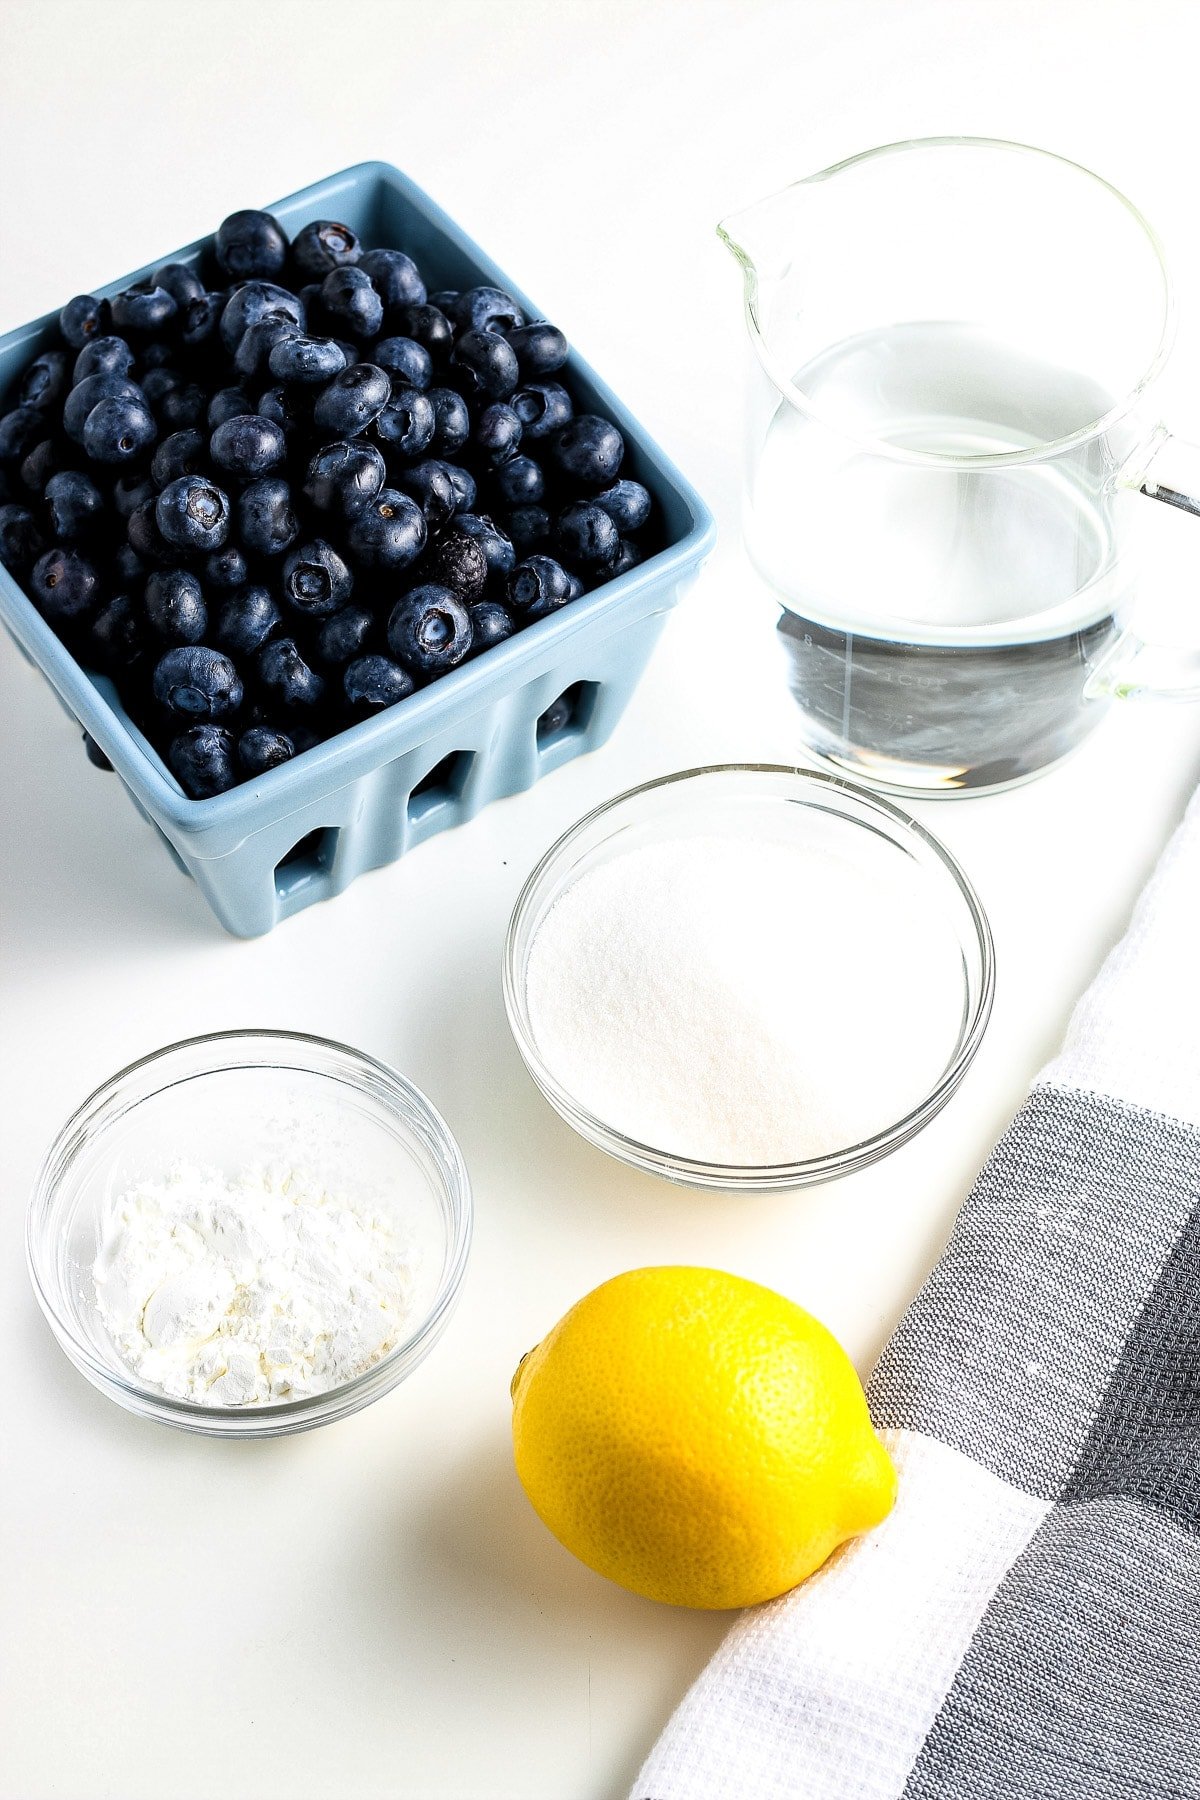 Overhead image of ingredients needed to make fresh blueberry sauce.